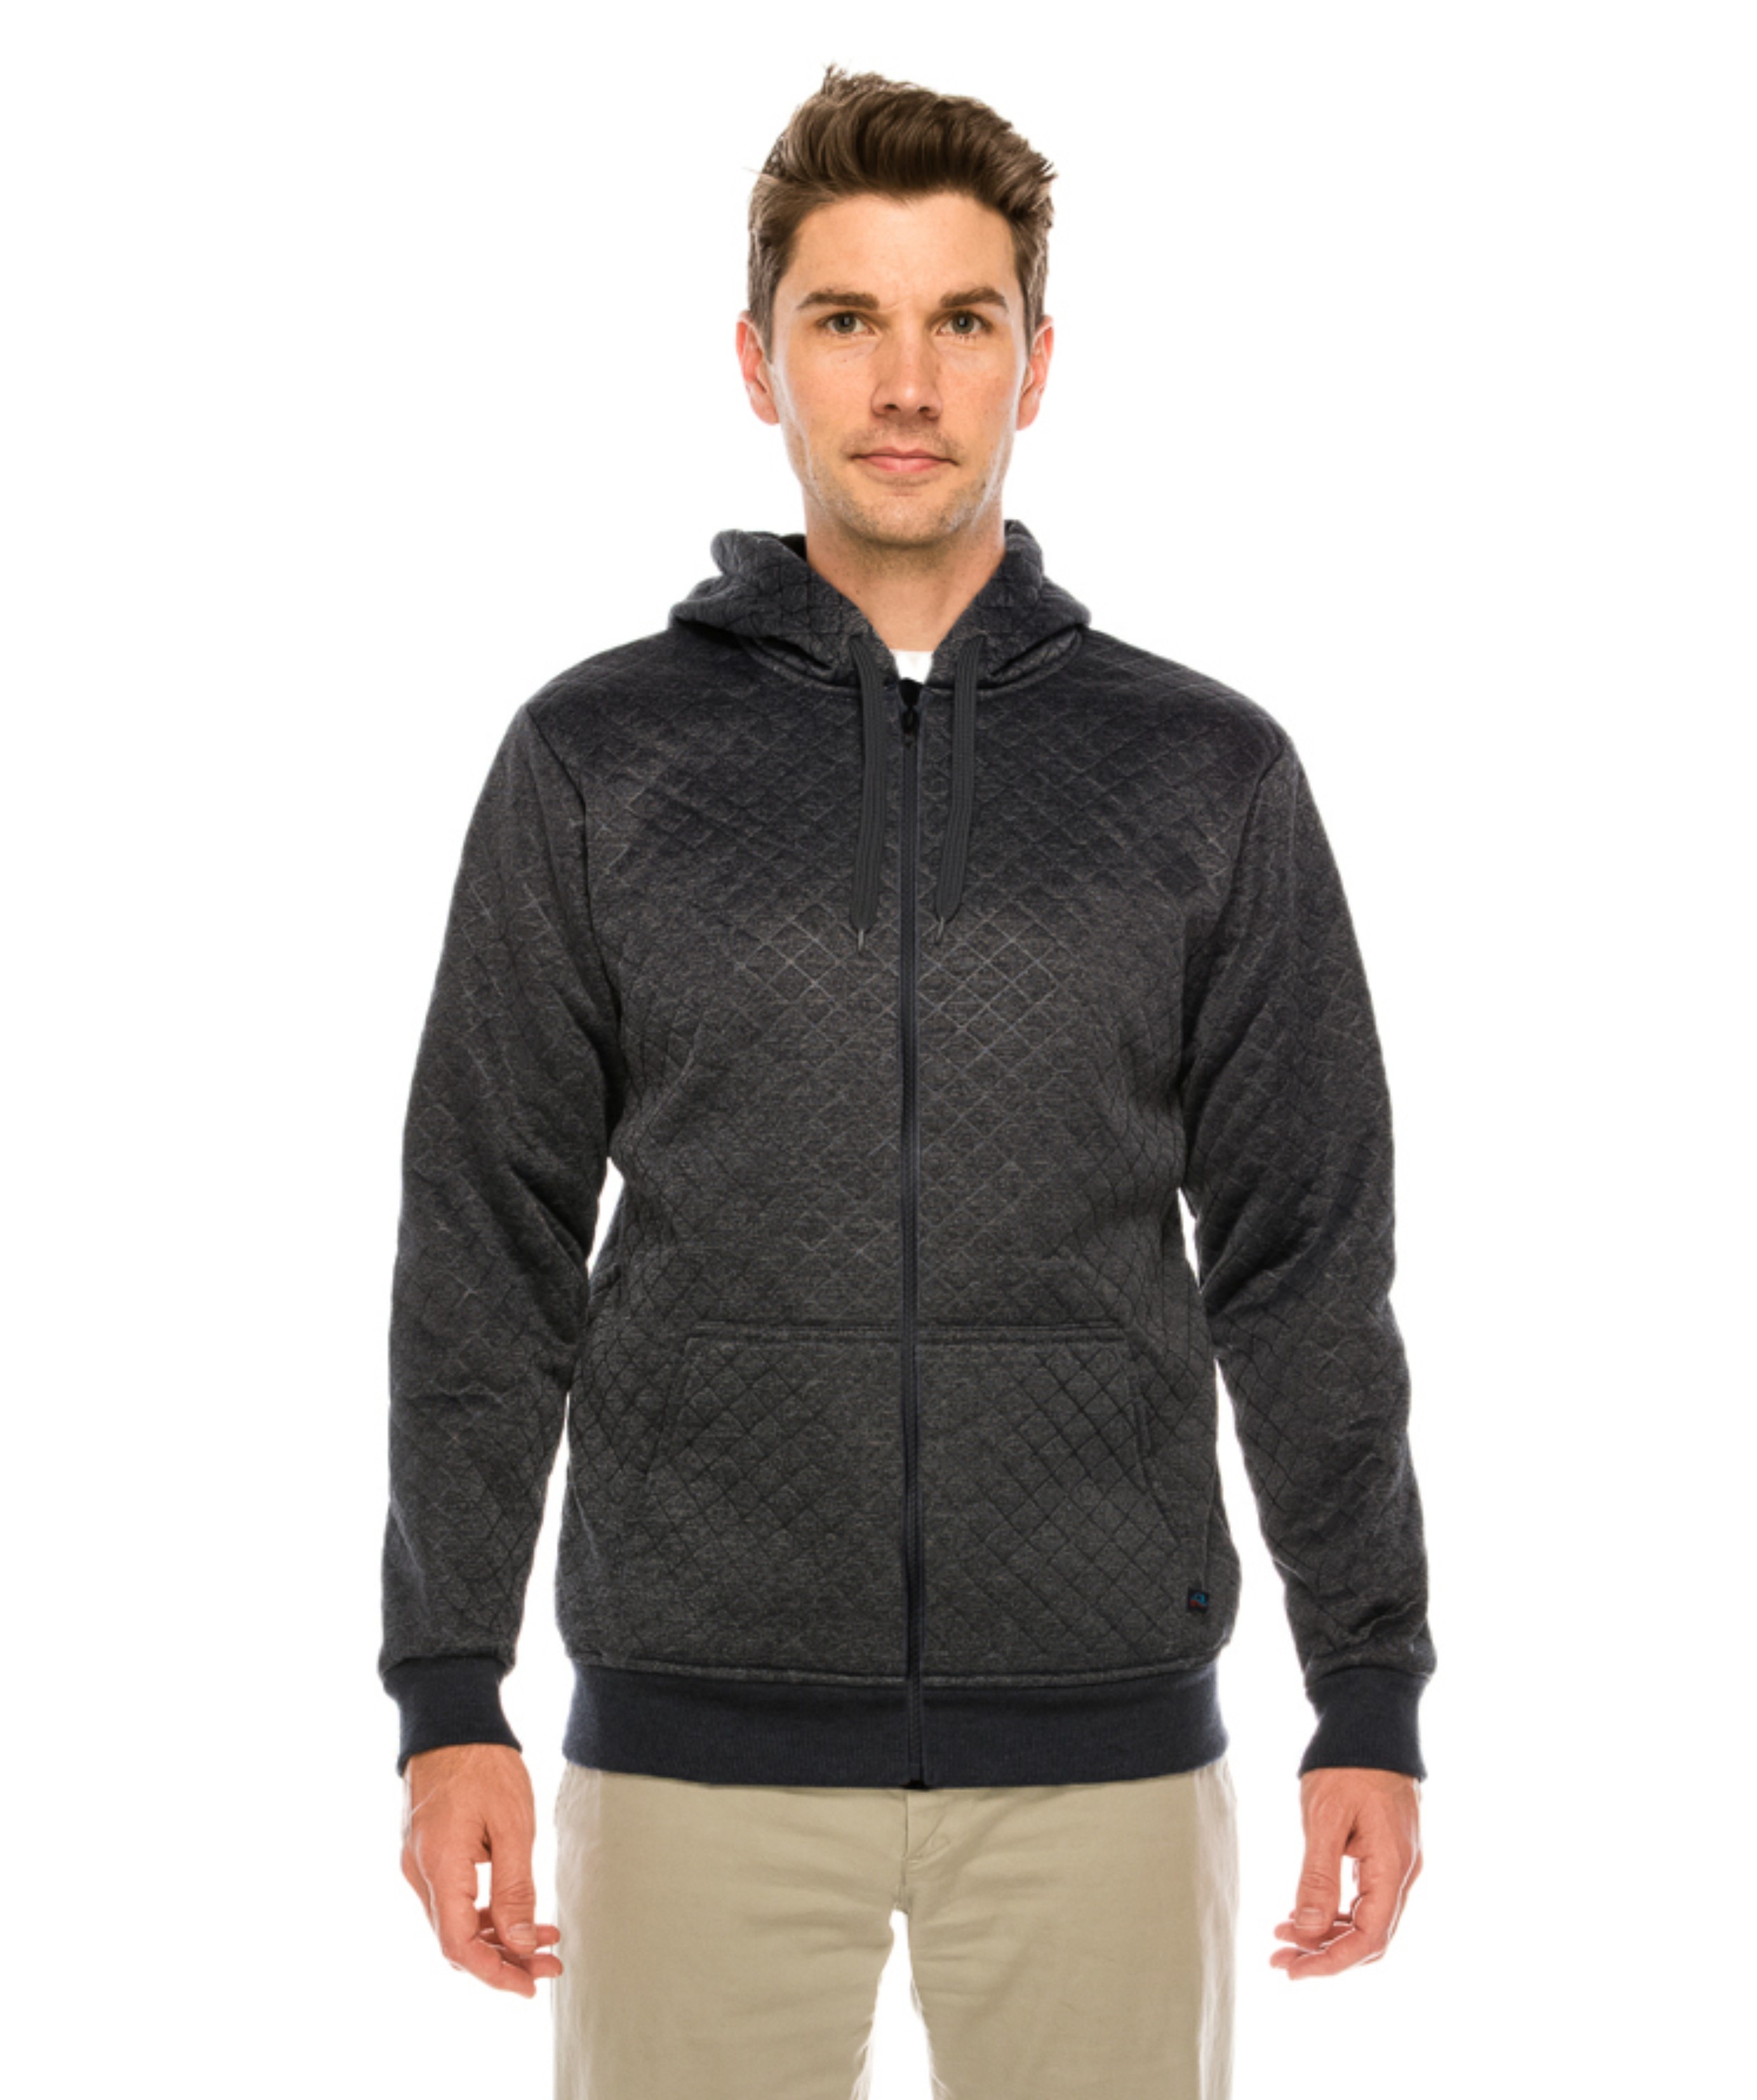 Men's Quilted Hoodie with Zipper and Drawstring - Walmart.com